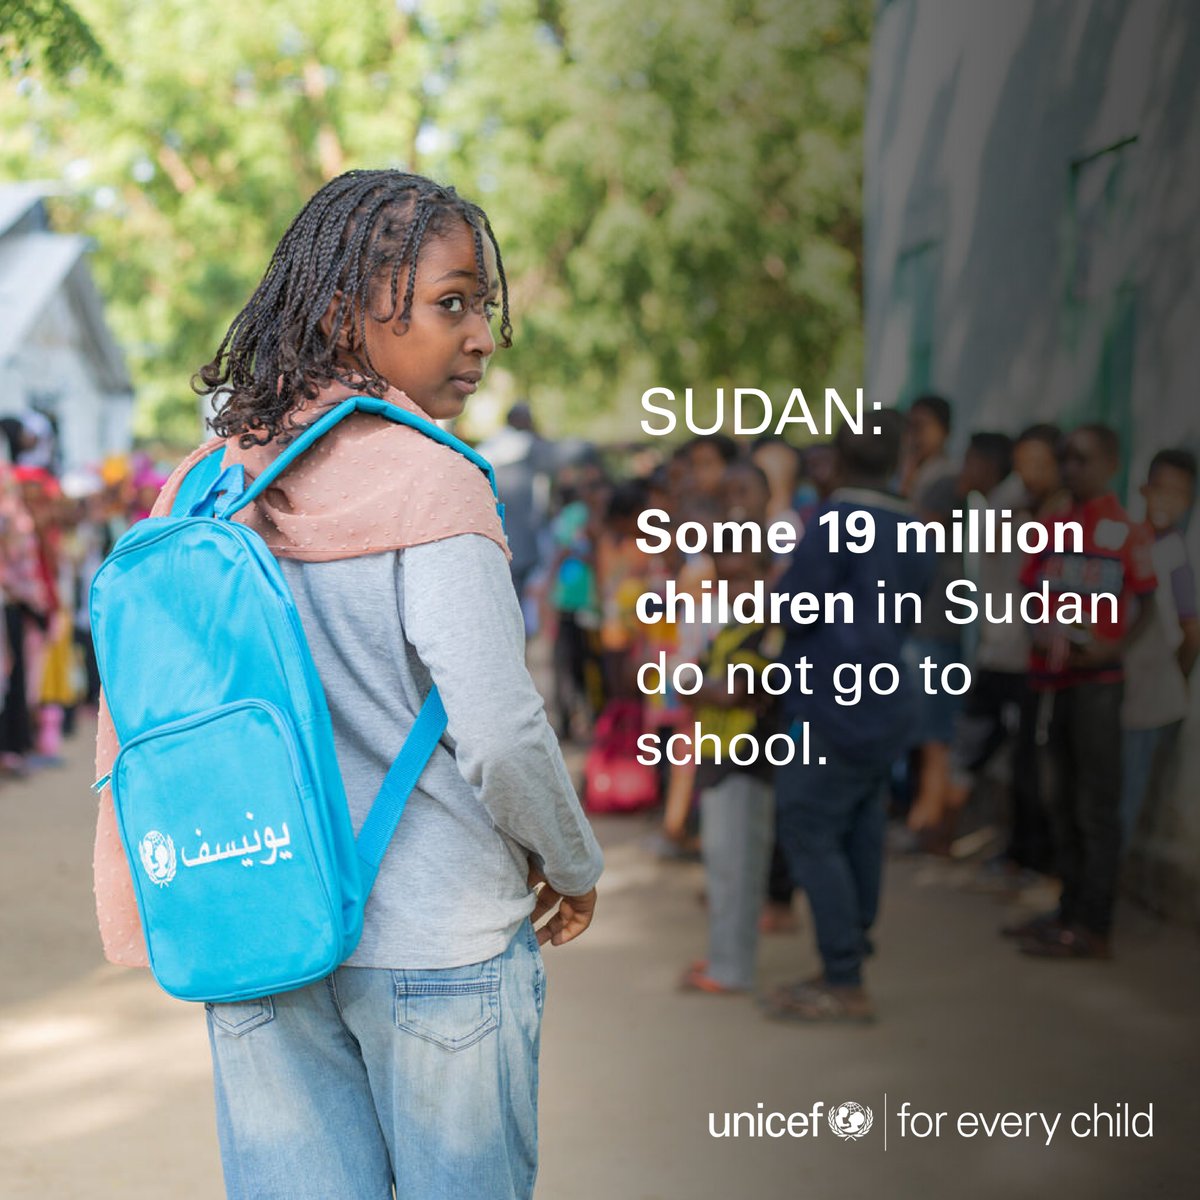 One year after the war, most schools remain closed. ​ All #children have the right to learn in a safe environment, no matter where they are. ​ We cannot allow this to continue. Now is the time to act for every child in #Sudan. ​ #WithSudan